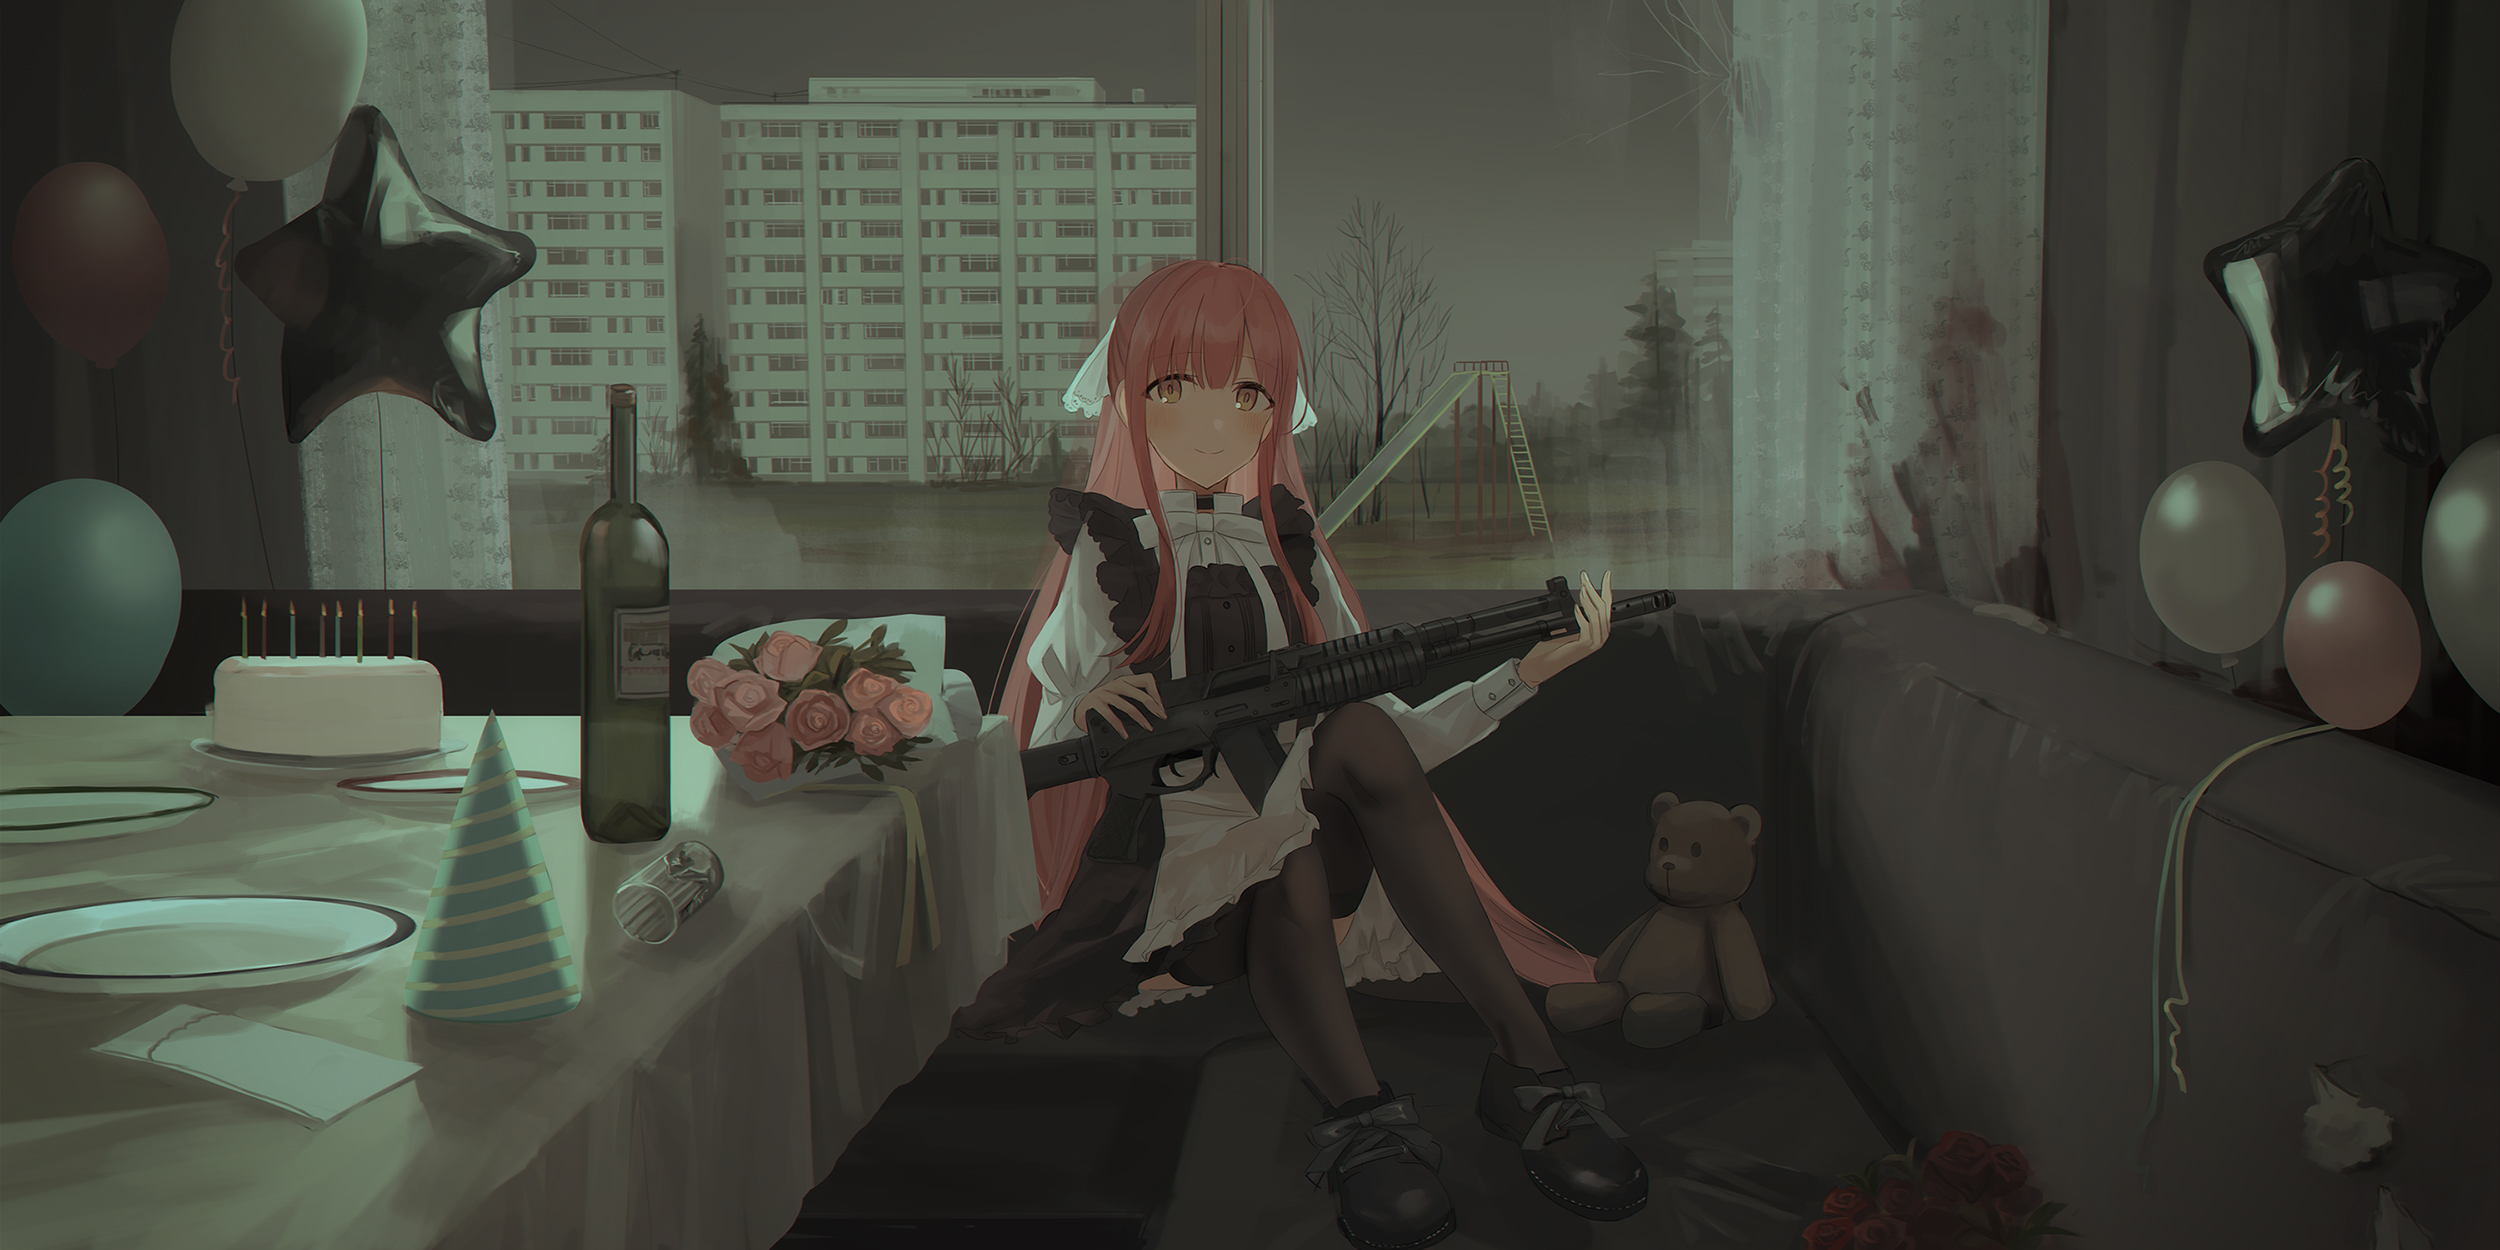 Anime 2500x1250 gun Party Room balloon bouquet teddy bears smiling pink hair playground cake plates champagne anime girls Chihuri 45 Pixiv girls with guns food sweets bottles machine gun weapon long hair plush toy women maid maid outfit anime